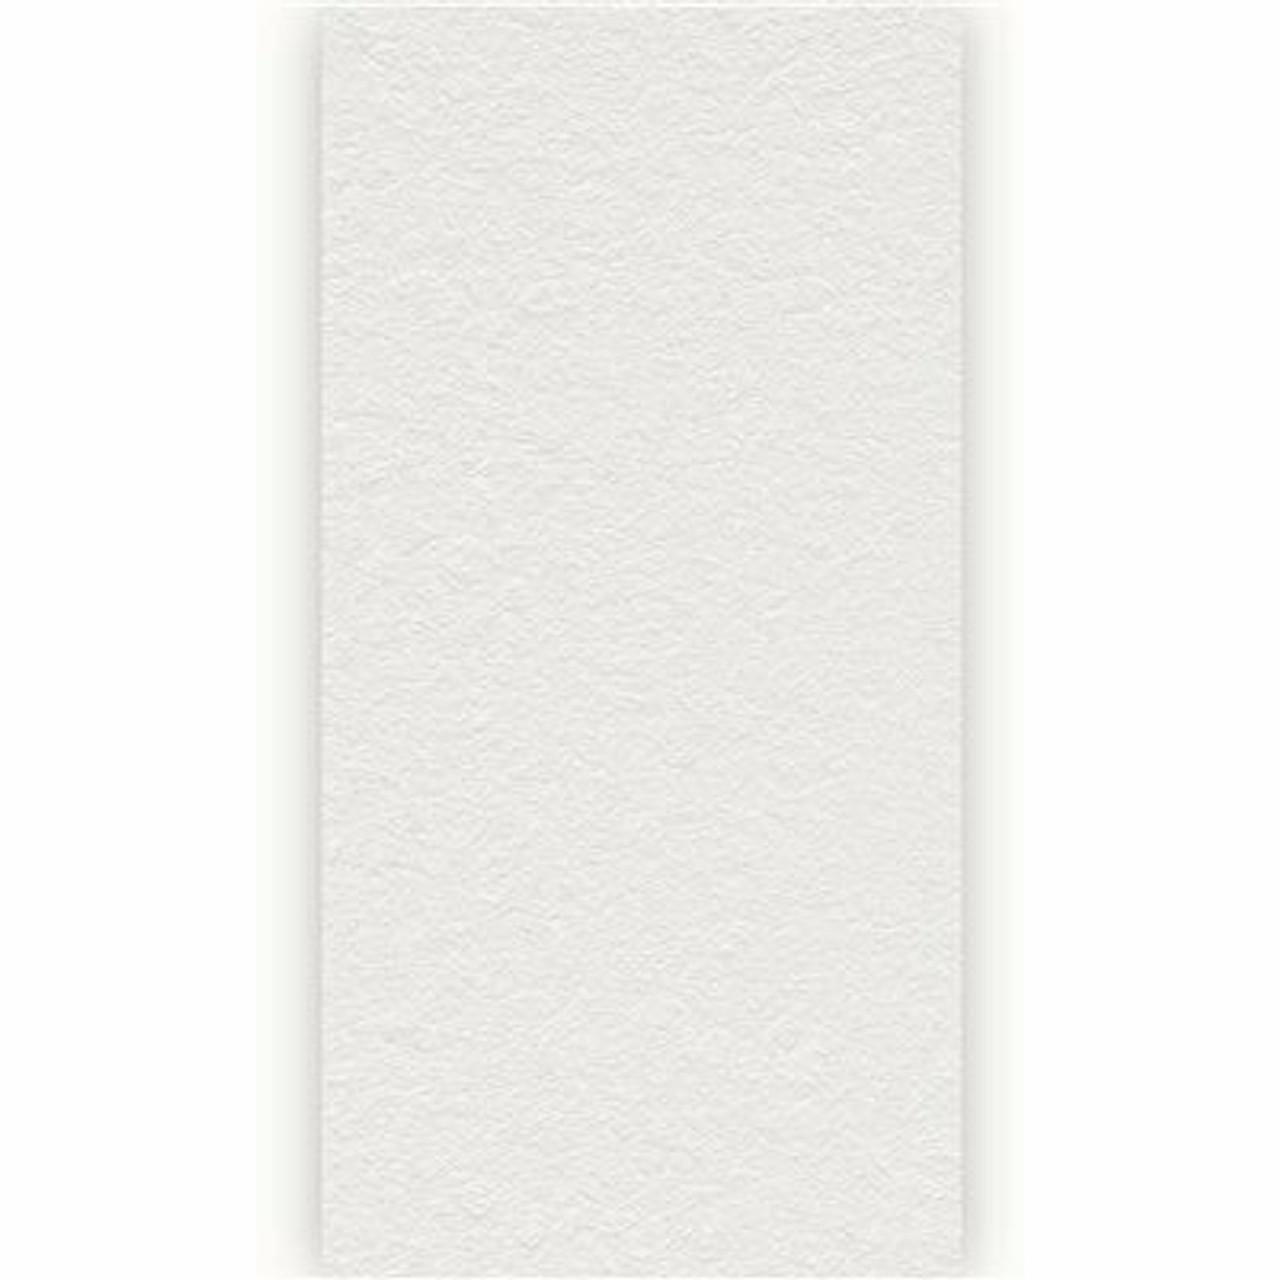 Toptile White 2 Ft. X 4 Ft Square Edgefiberglass Lay-In Ceiling Panels(1 Pallet Contains 1,920 Sq Ft)